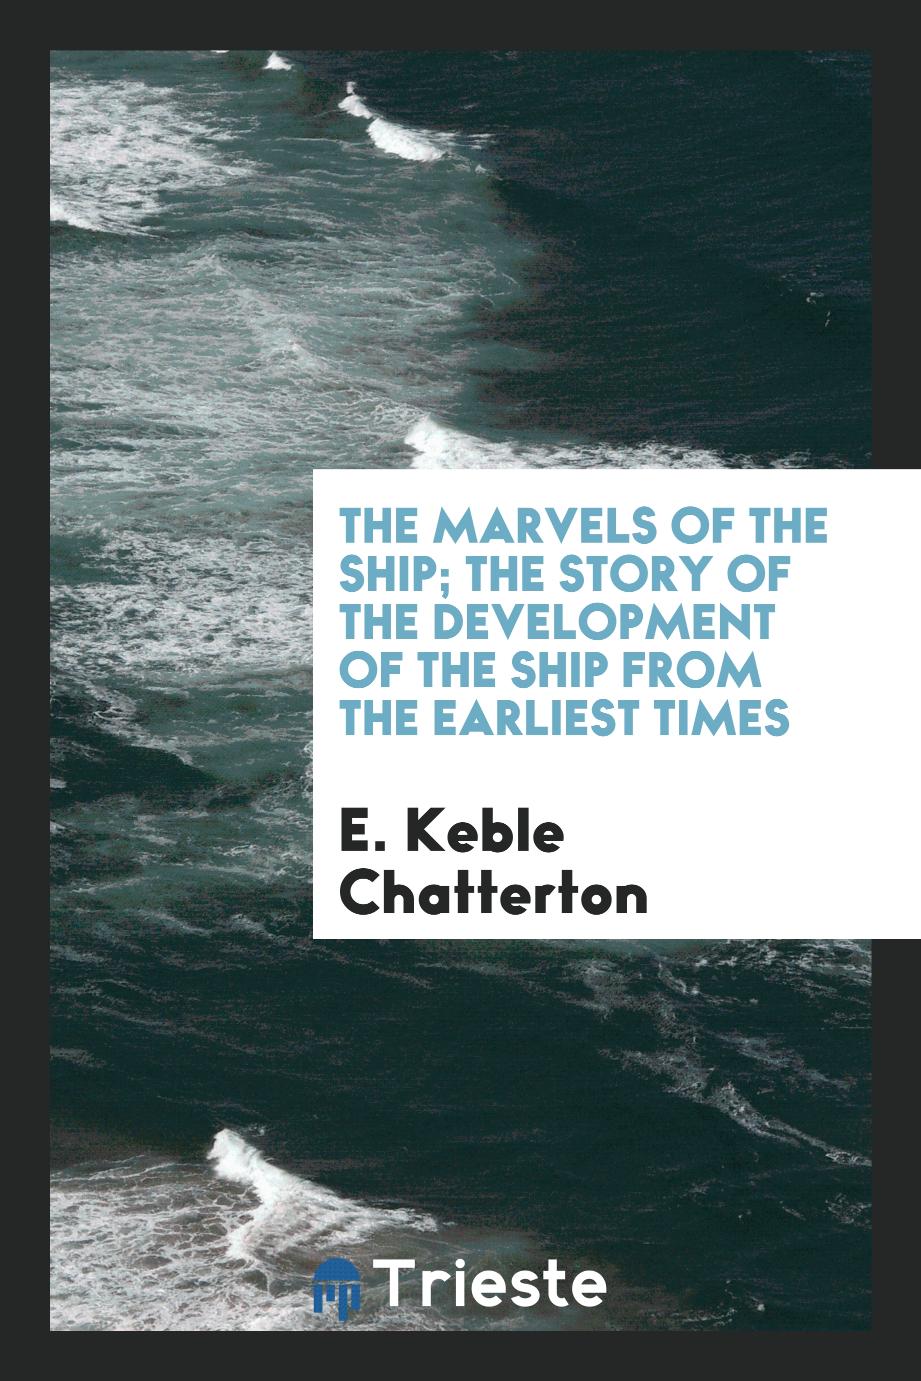 The marvels of the ship; the story of the development of the ship from the earliest times